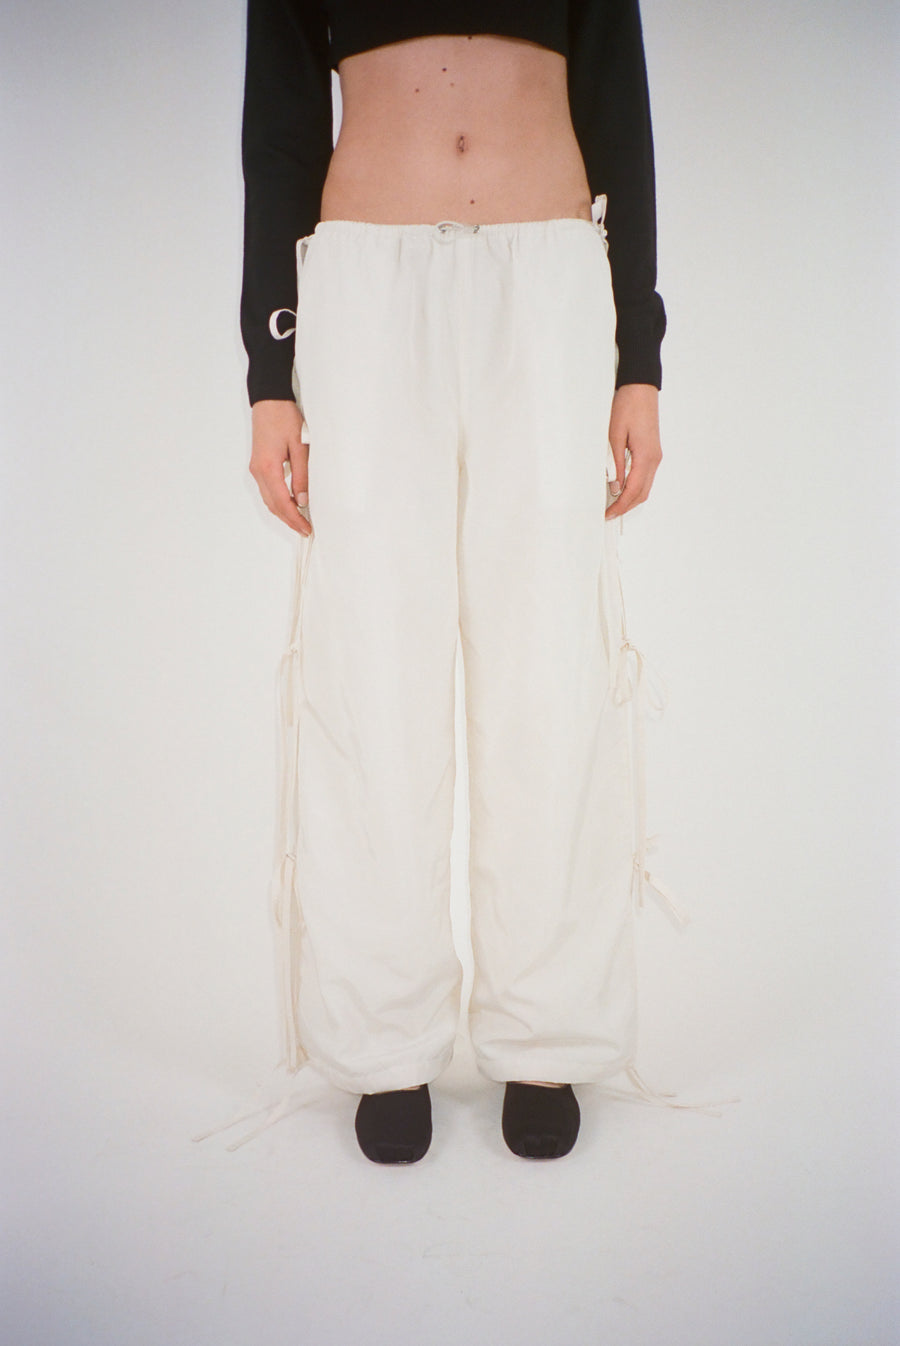 Trackpant in white with slits and ties at sides on model